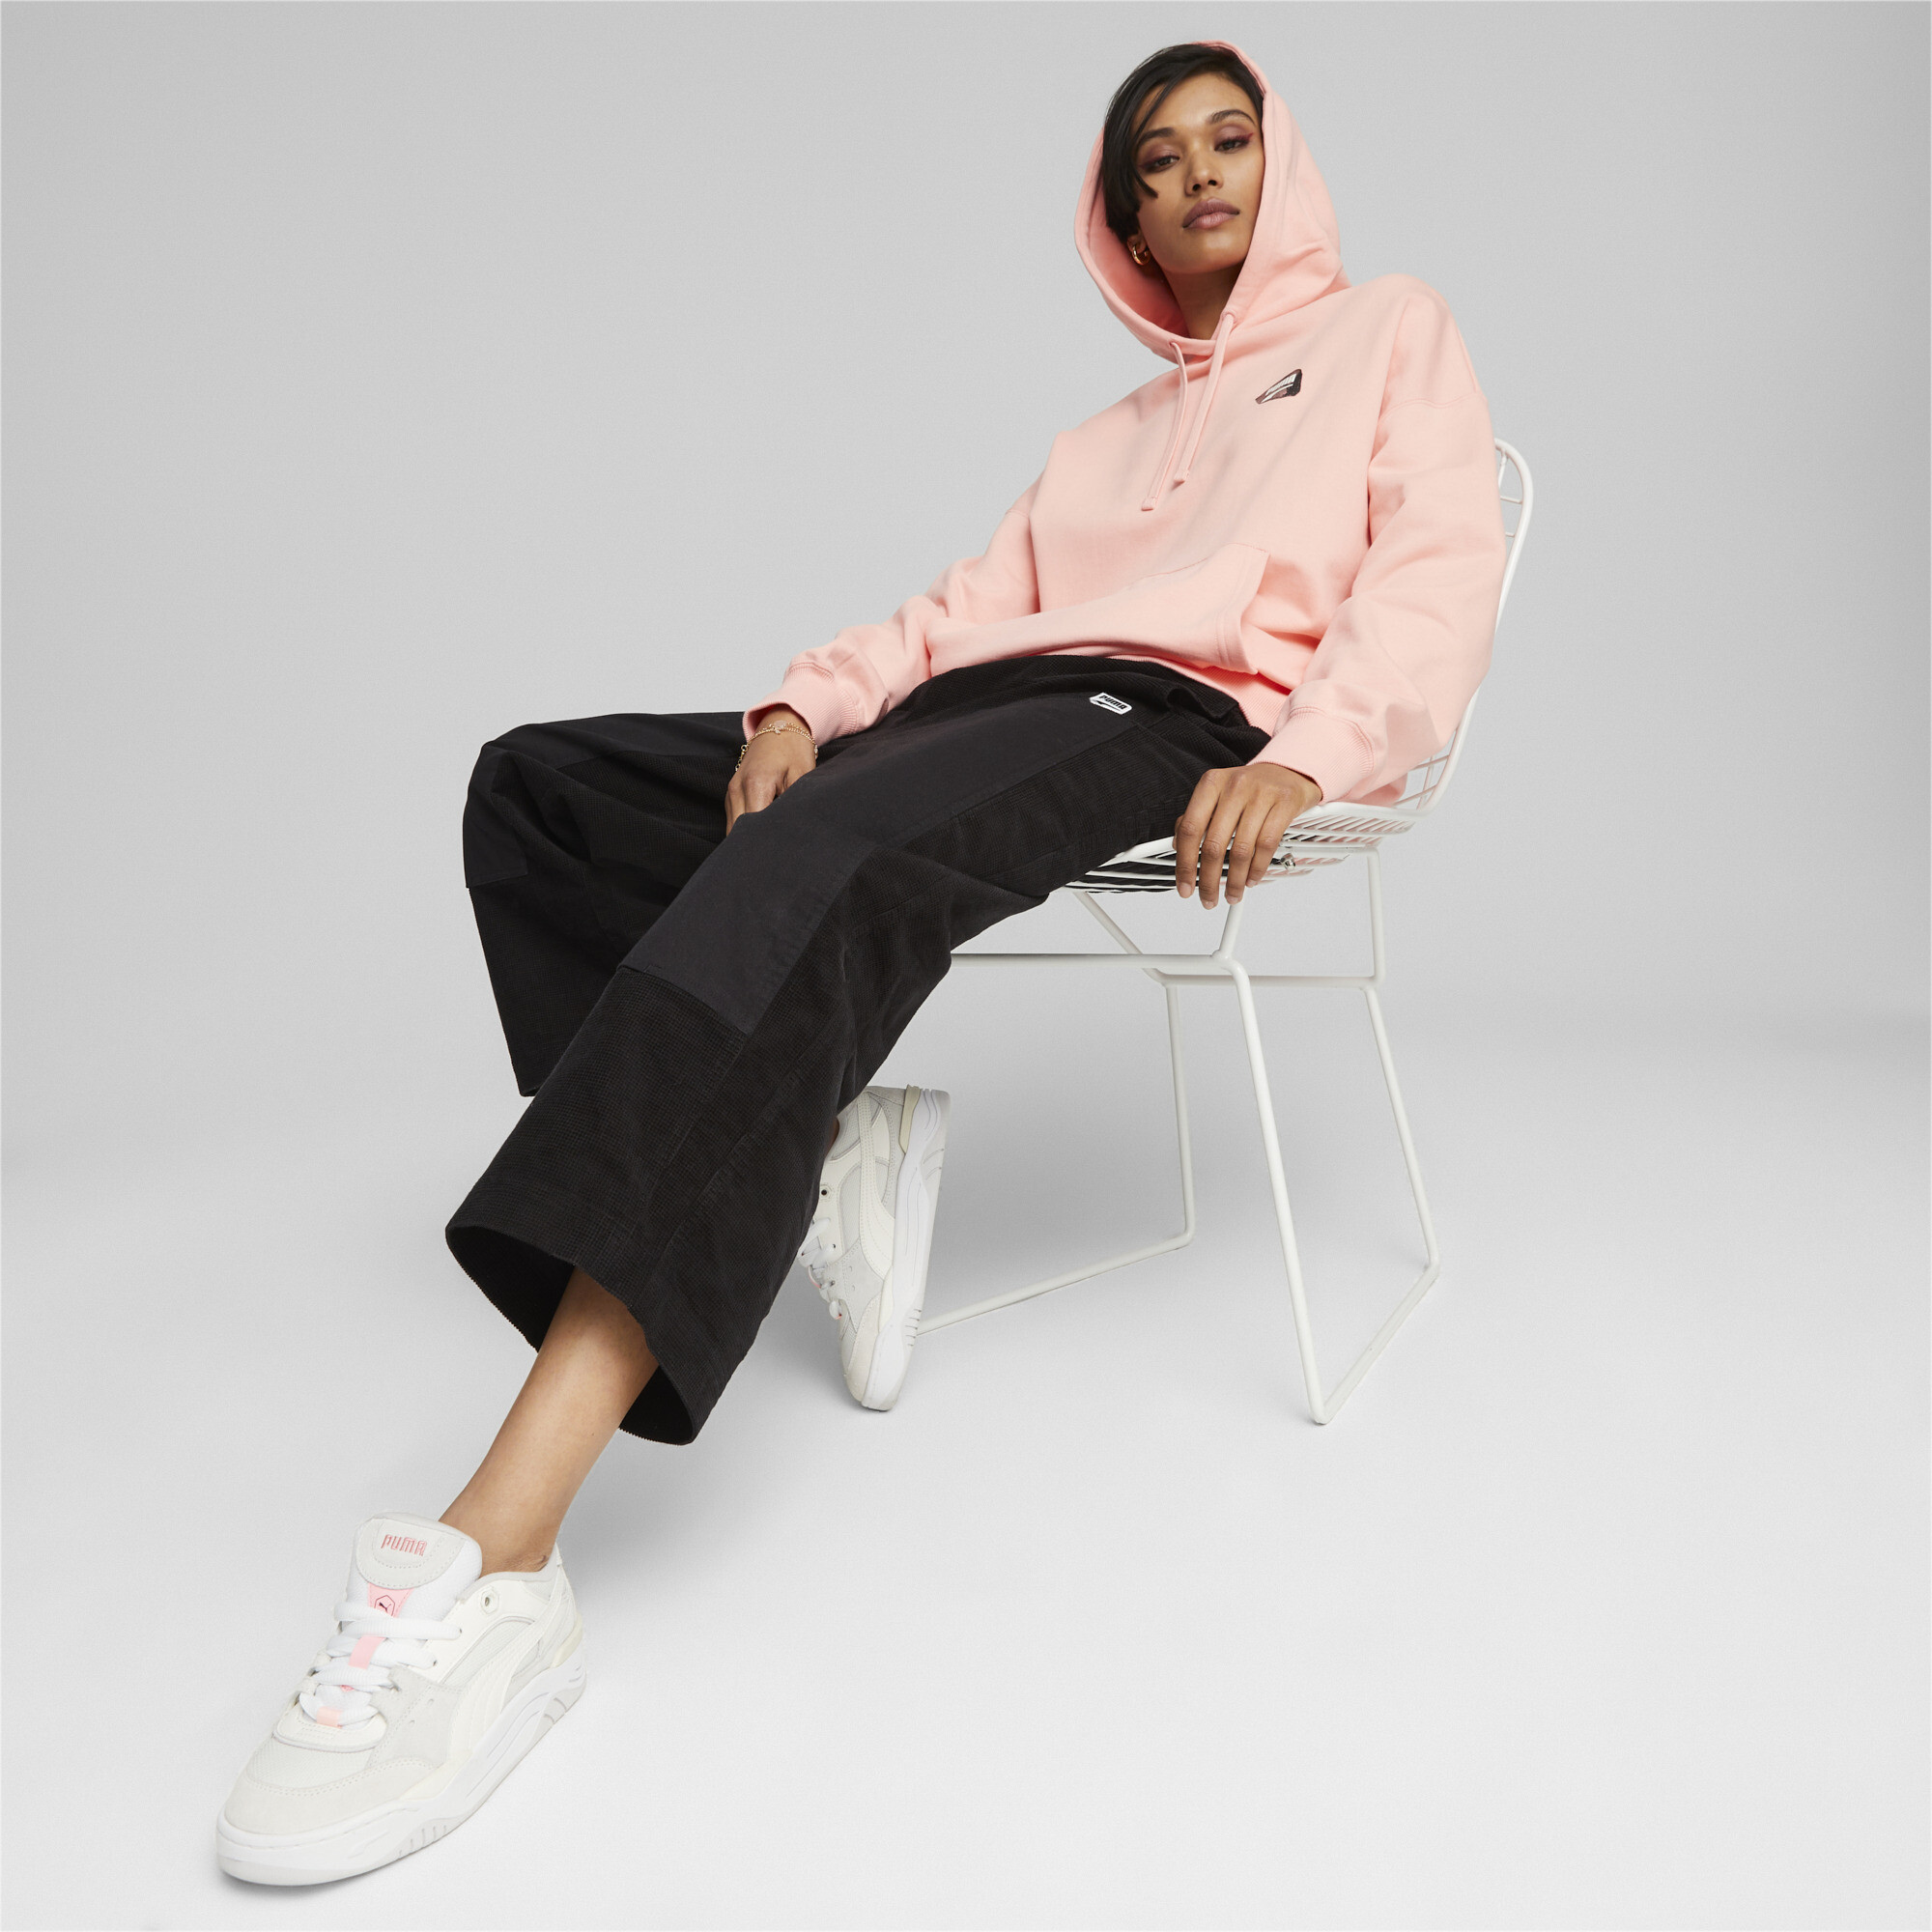 Women's PUMA DOWNTOWN Oversized Graphic Hoodie In Pink, Size Medium